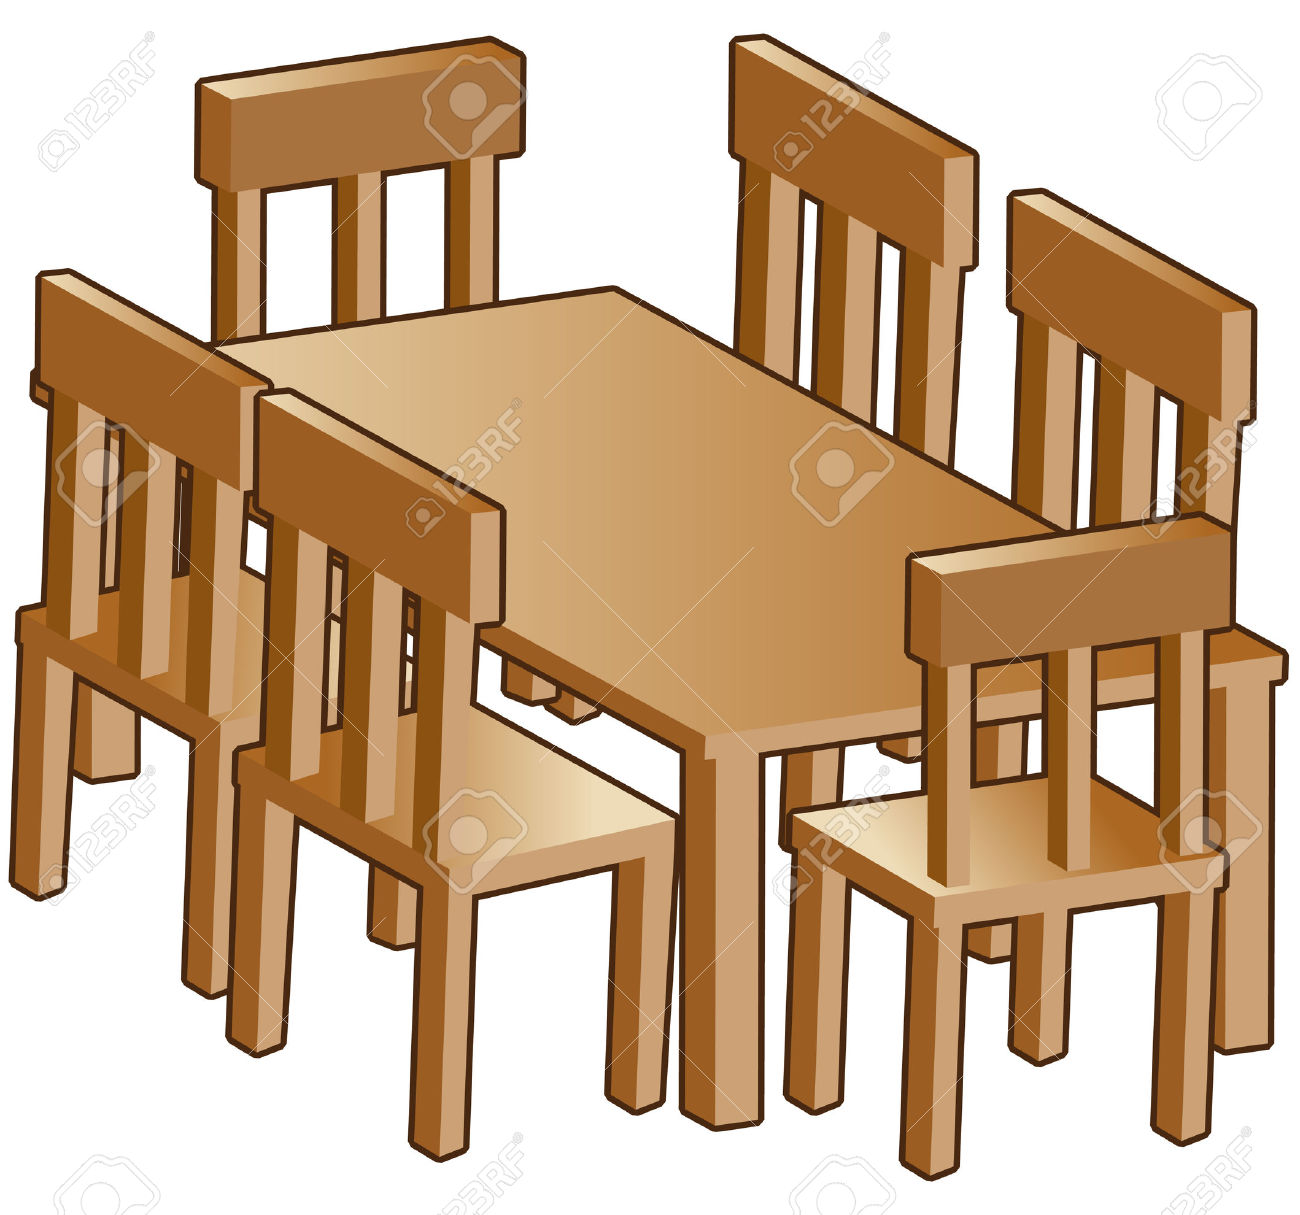 dining room clipart images - photo #10